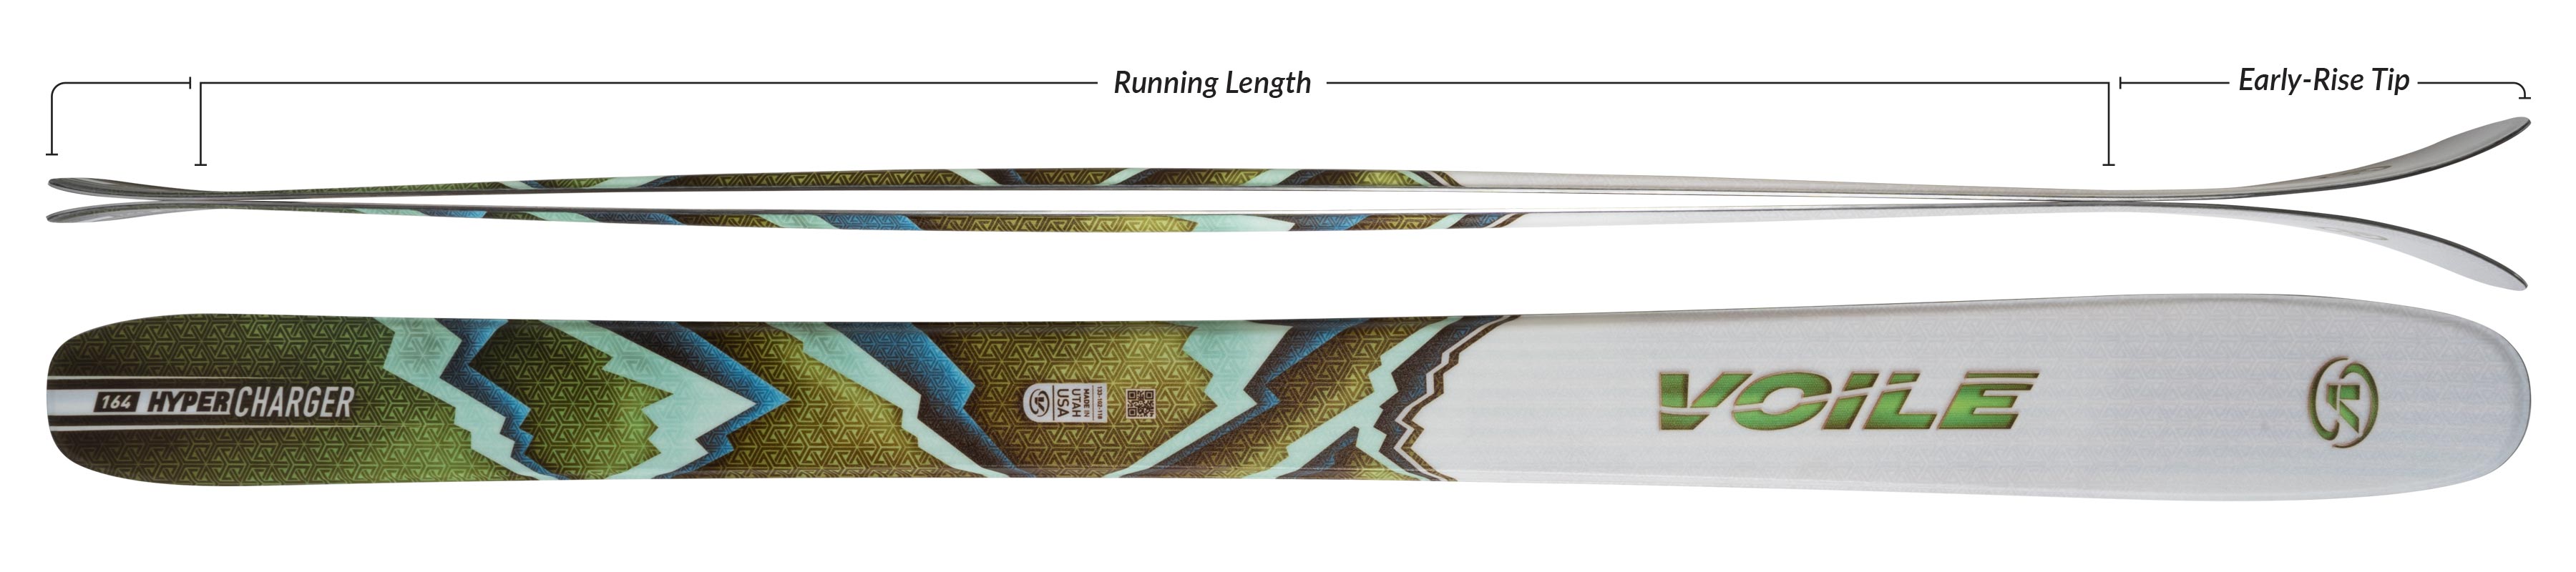 Voile Women's HyperCharger Skis Camber Profile